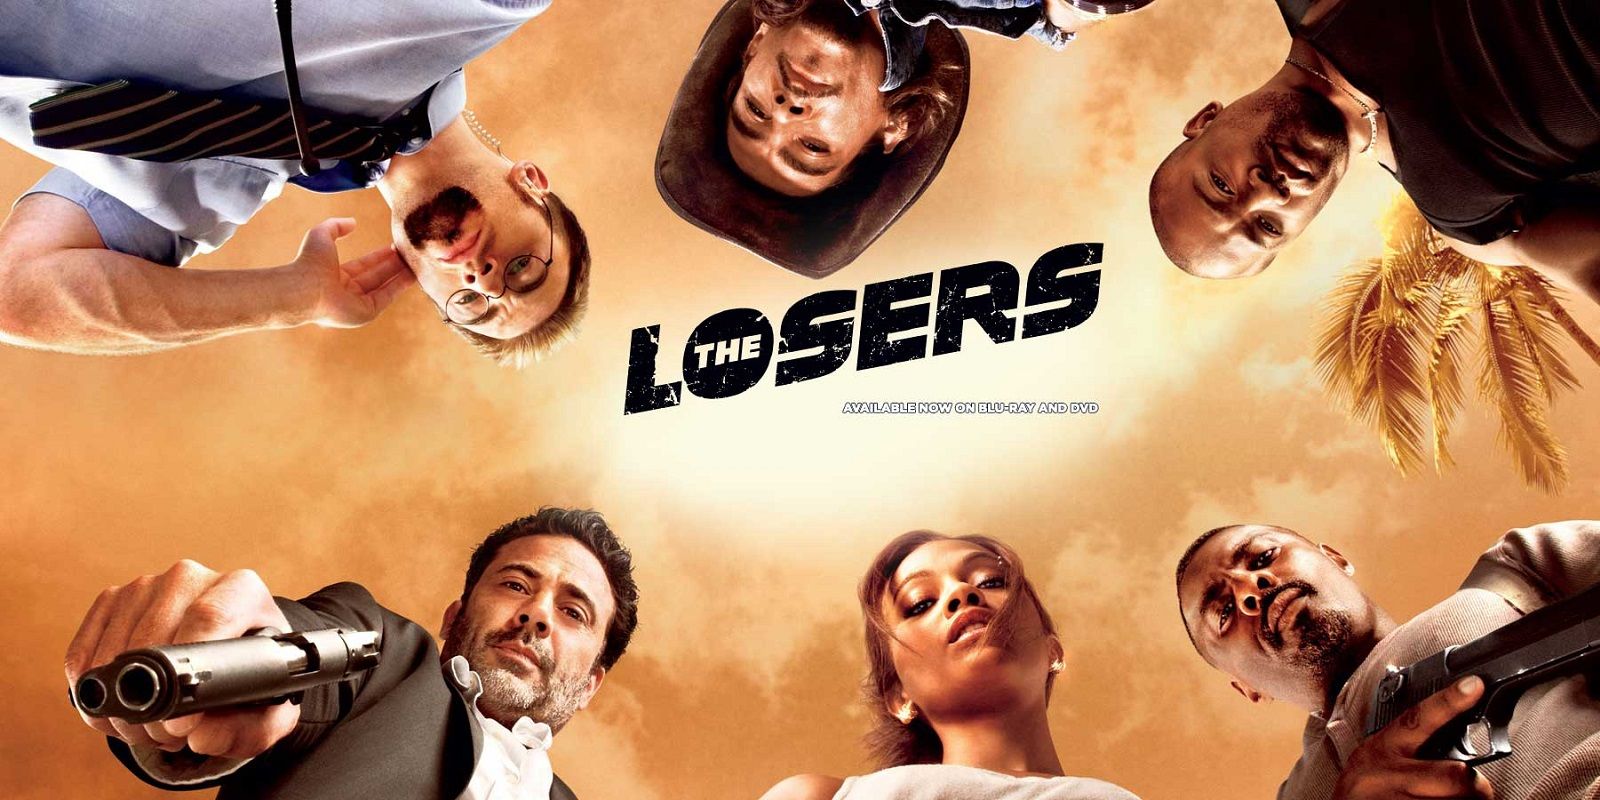 Chris Evans - The Losers